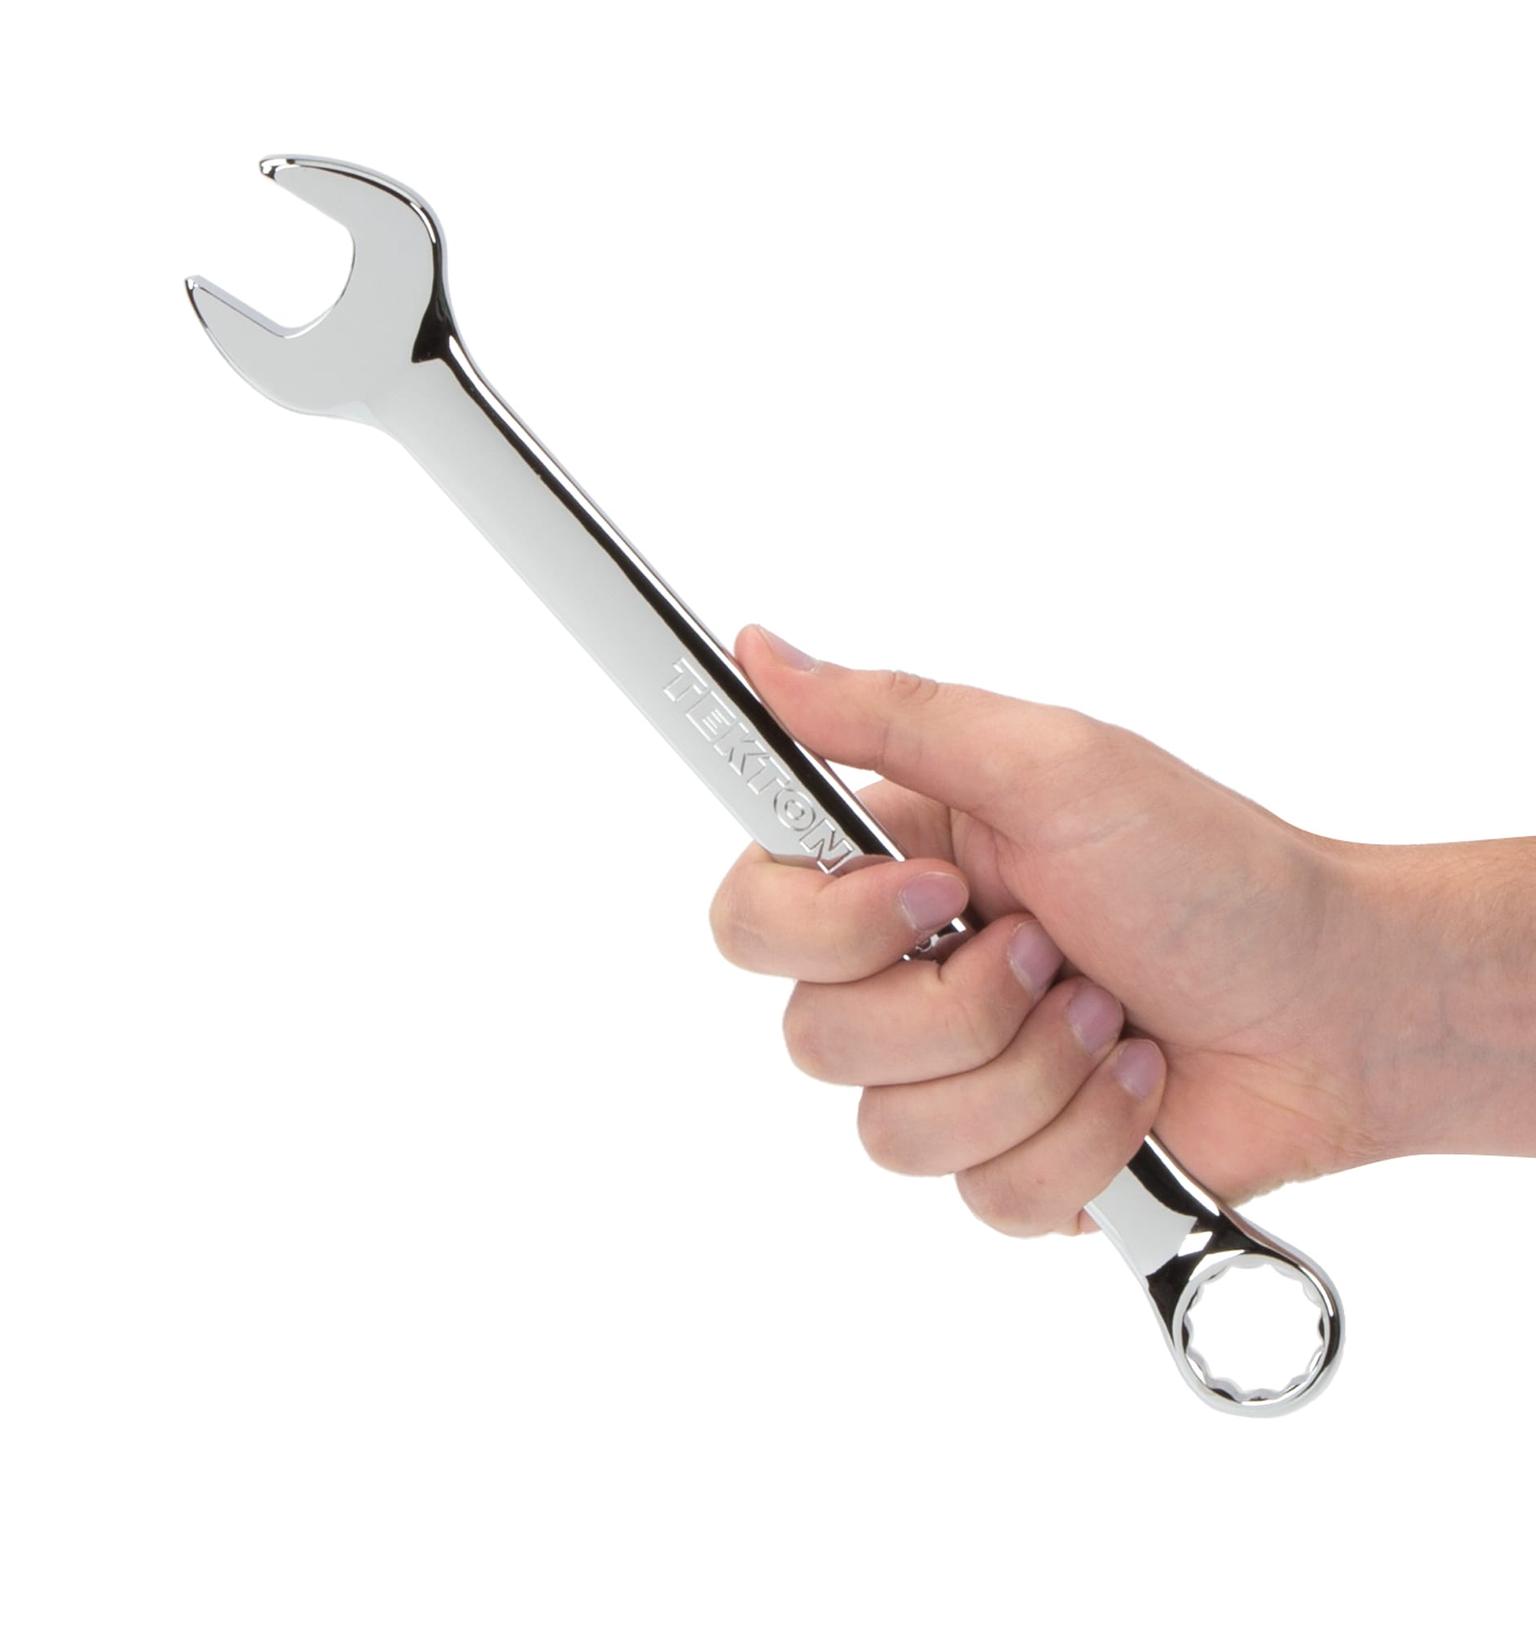 TEKTON 18288-T 18 mm Combination Wrench